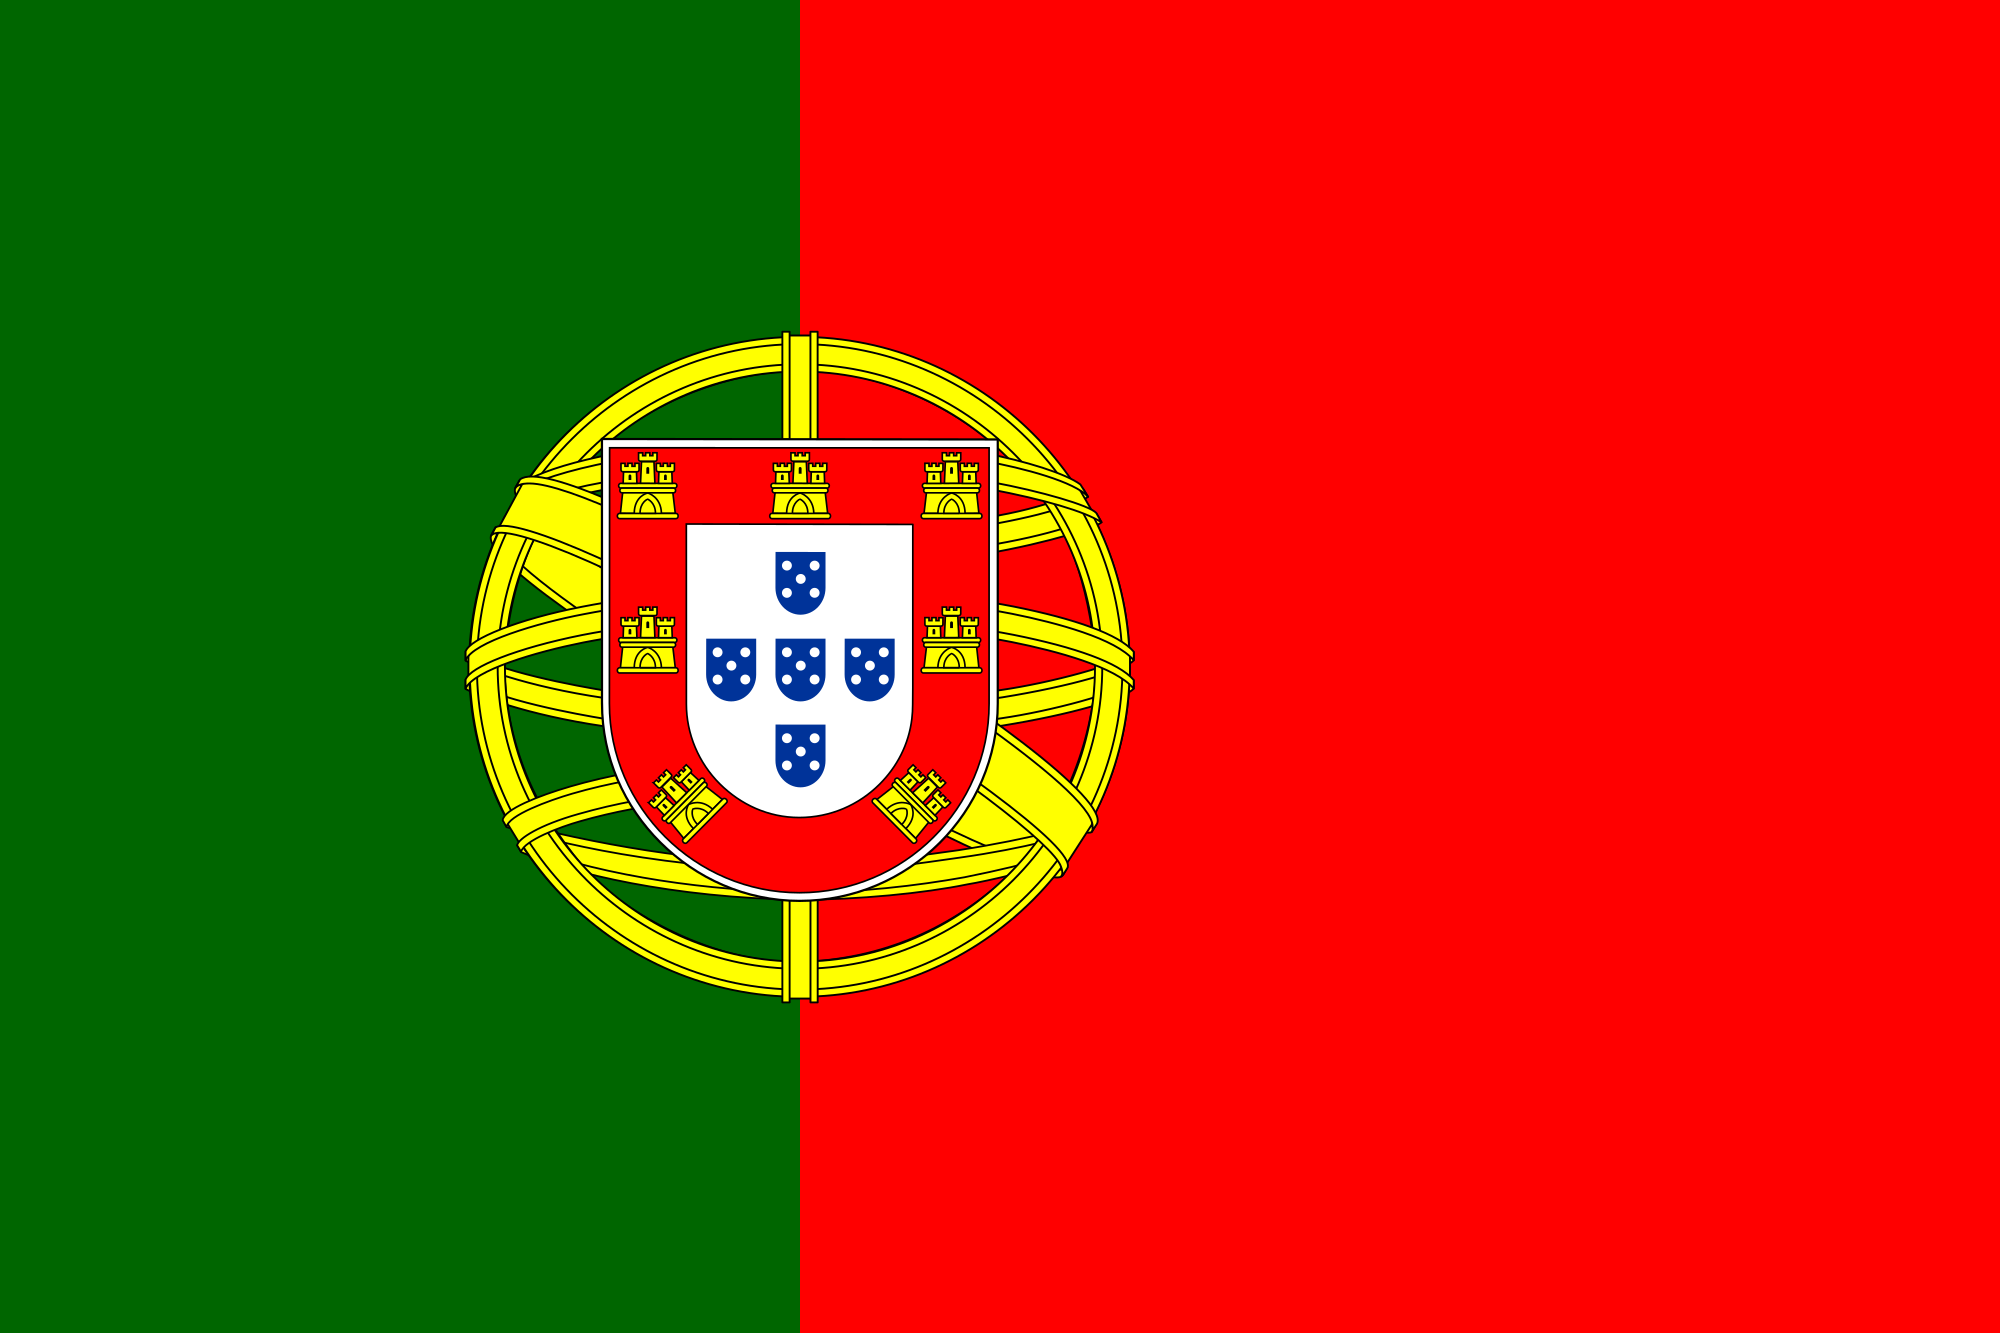 https://upload.wikimedia.org/wikipedia/commons/thumb/5/5c/Flag_of_Portugal.svg/2000px-Flag_of_Portugal.svg.png